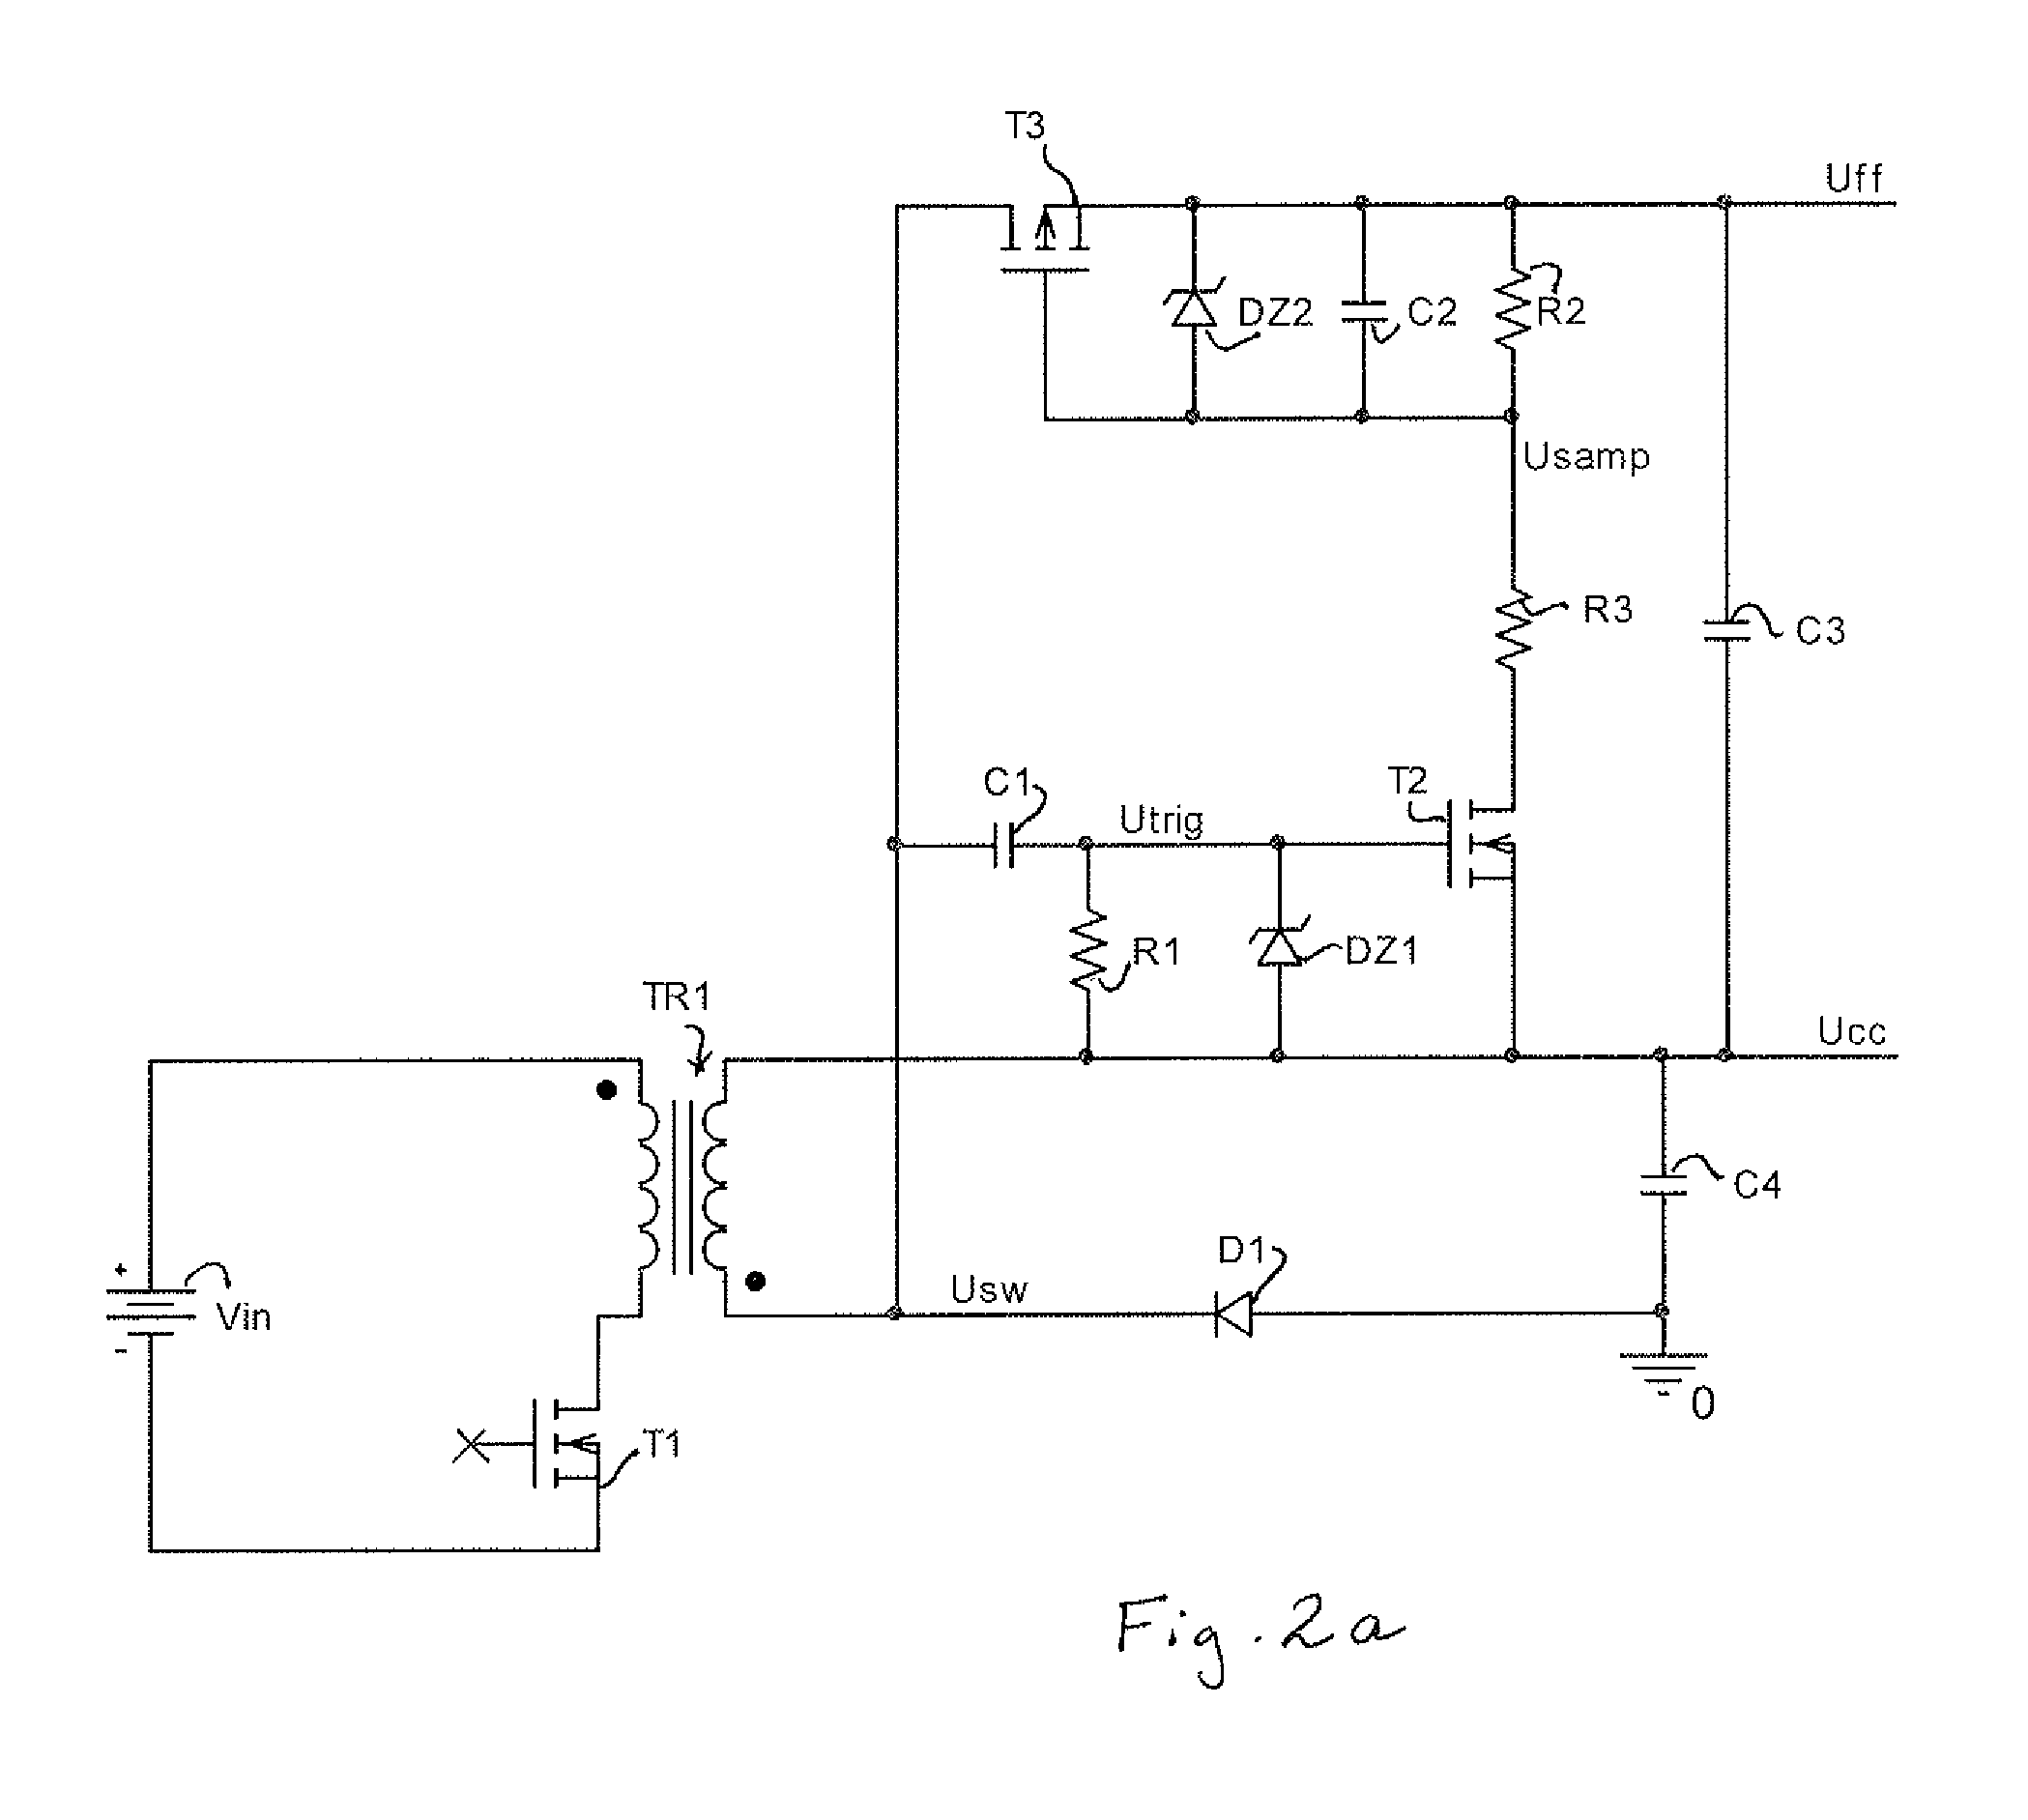 Power converter utilizing a RC circuit to conduct during the rising edge of the transformer voltage